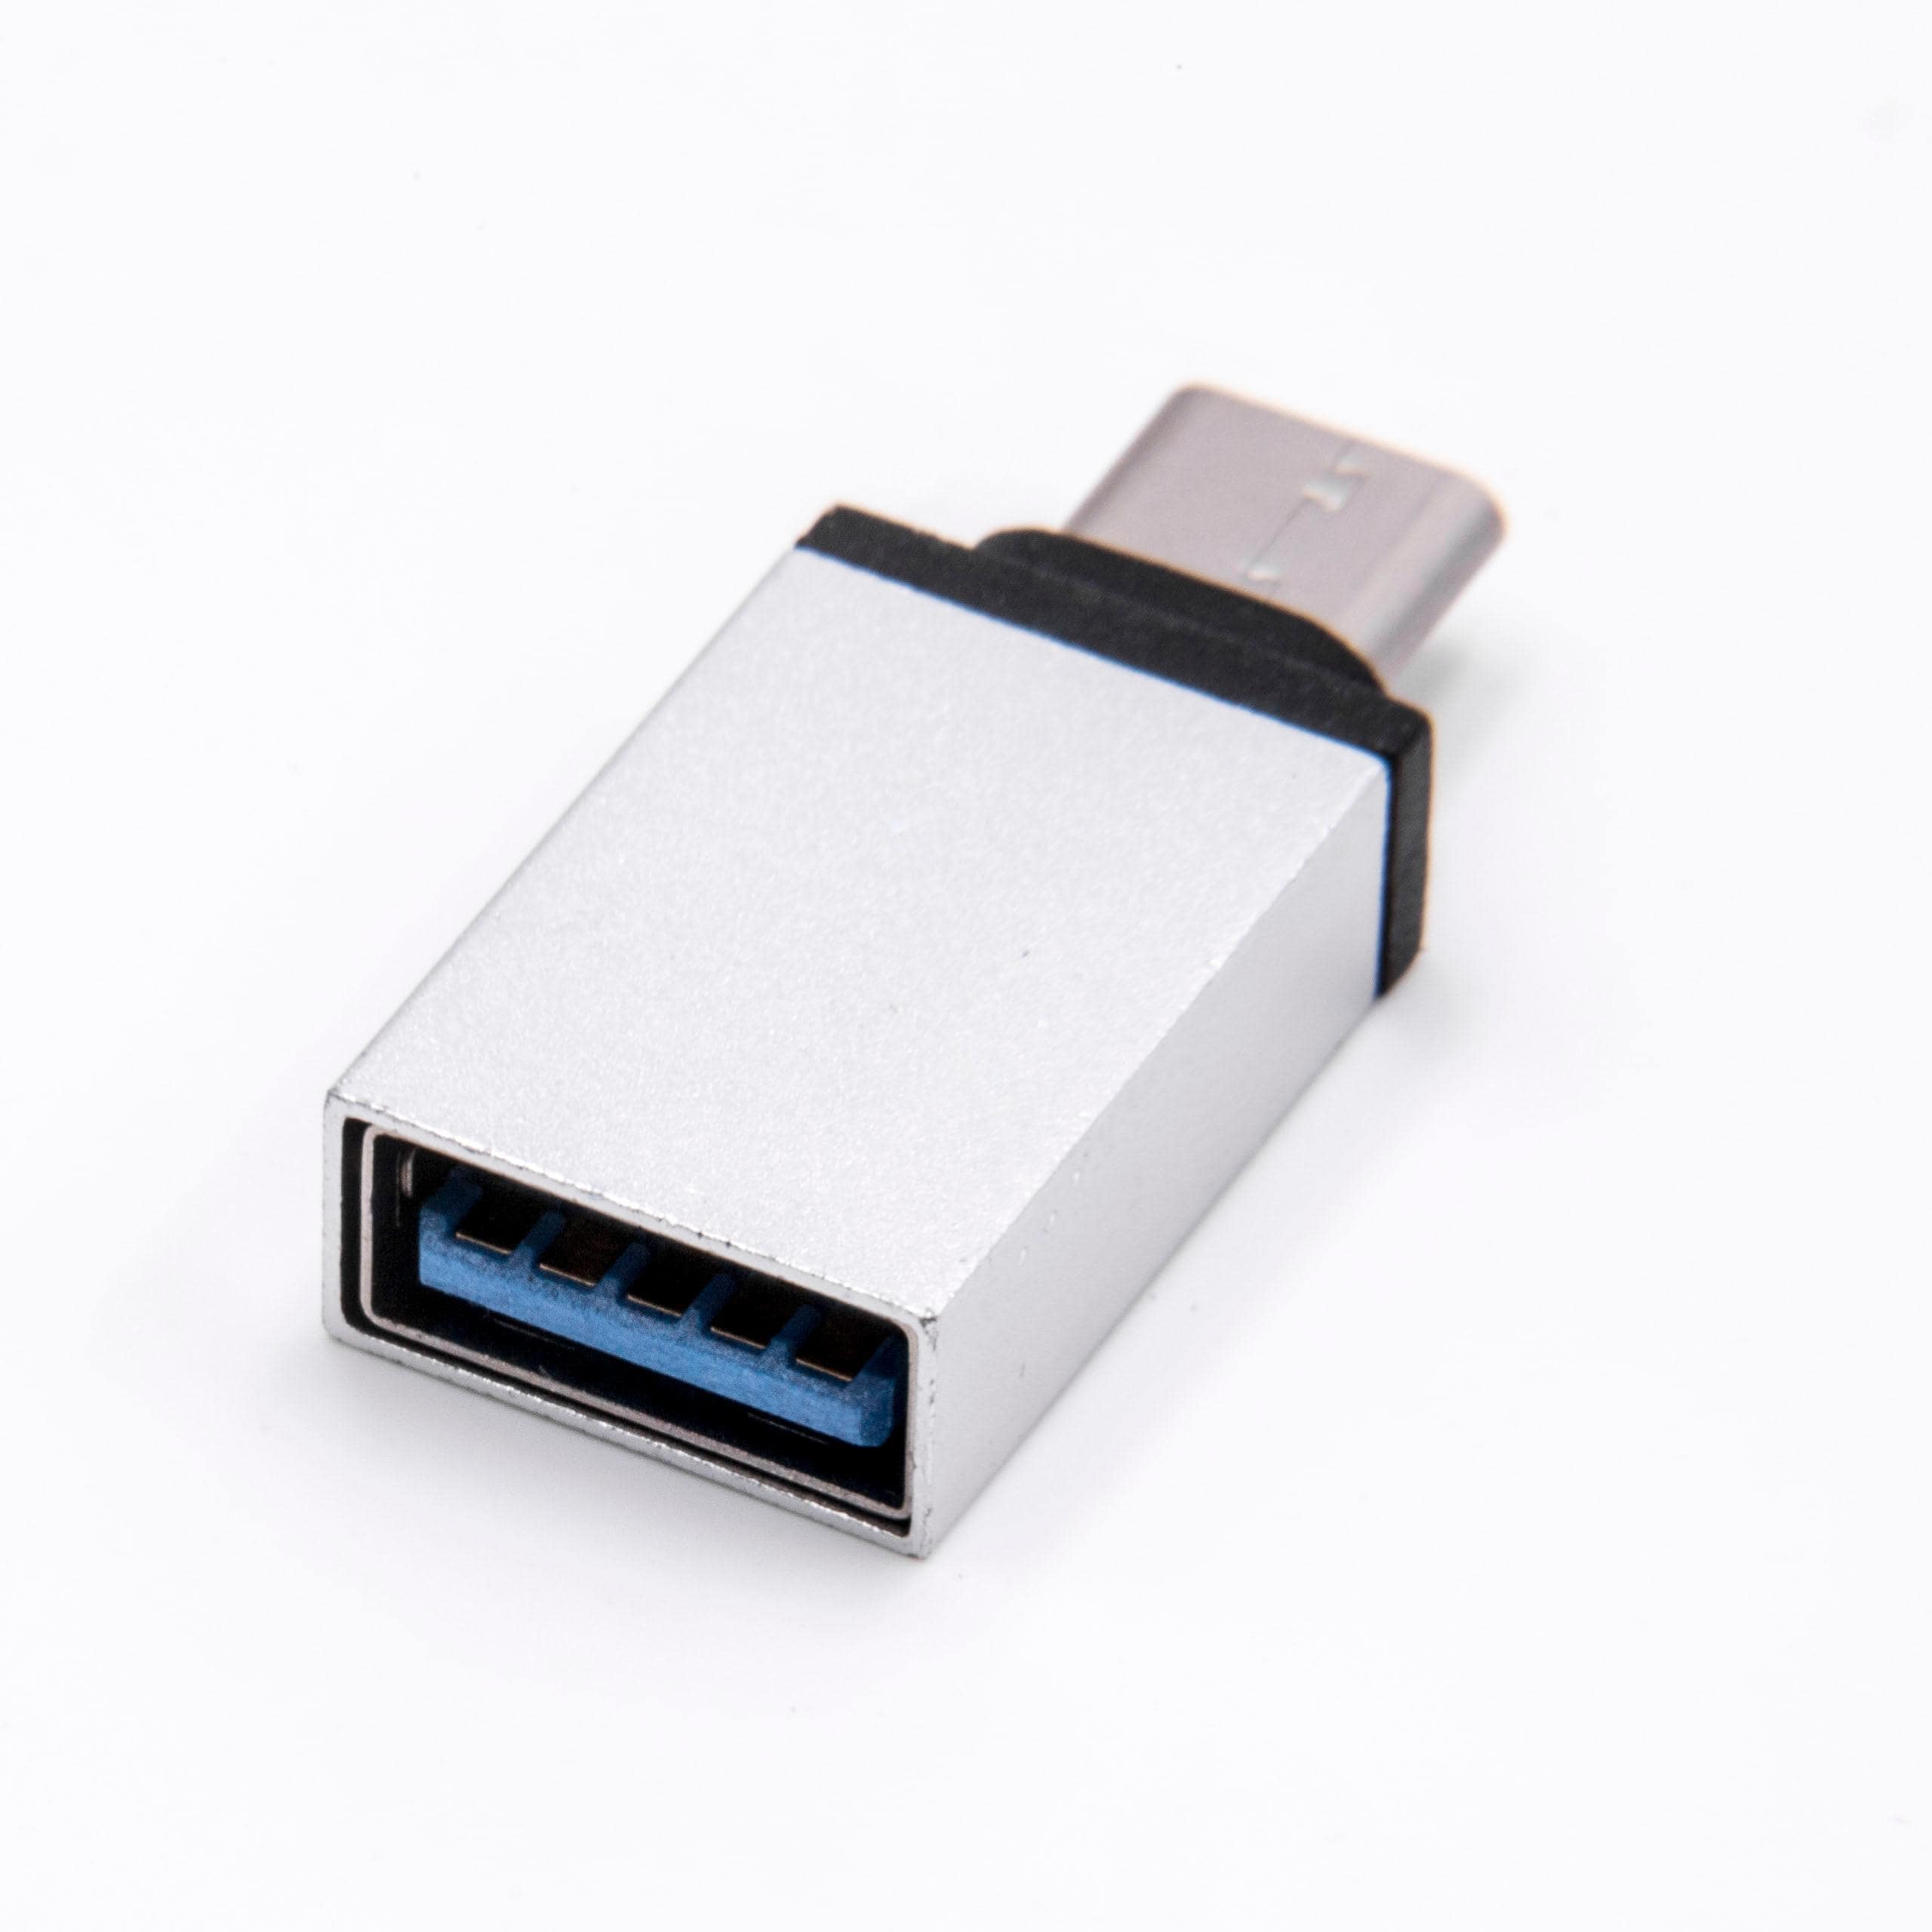 Adapter USB Type C to USB 3.0 suitable for Smartphone, Tablet, Notebook - USB Adapter Silver